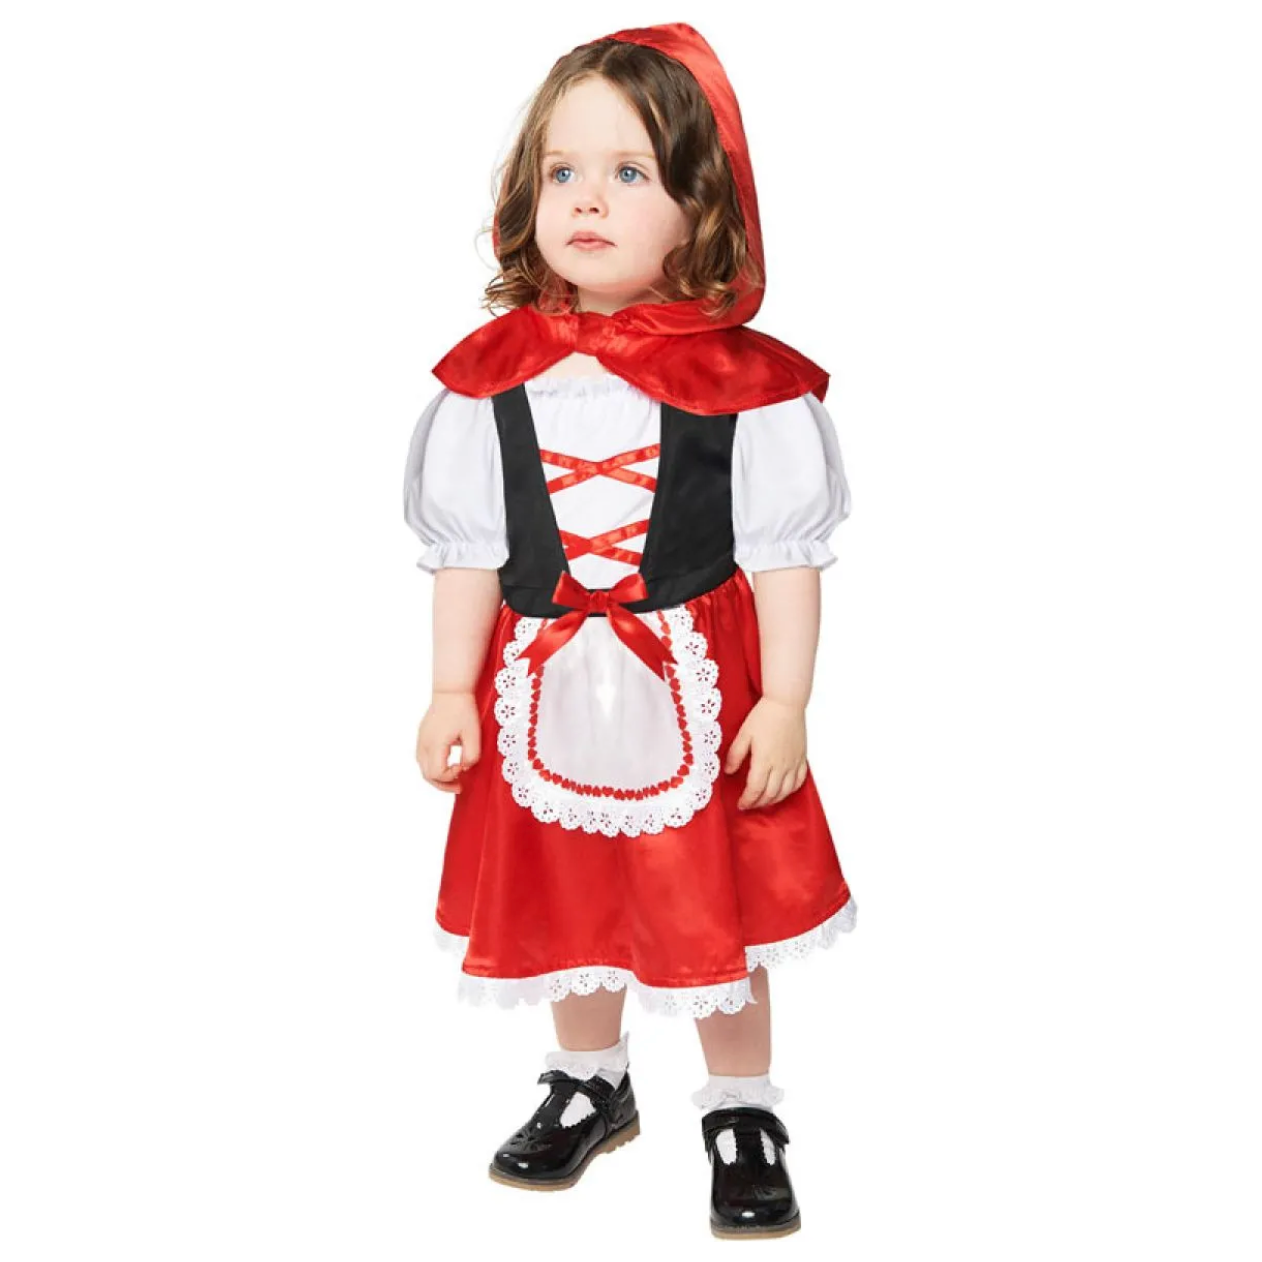 Cute Red Riding Hood Costume